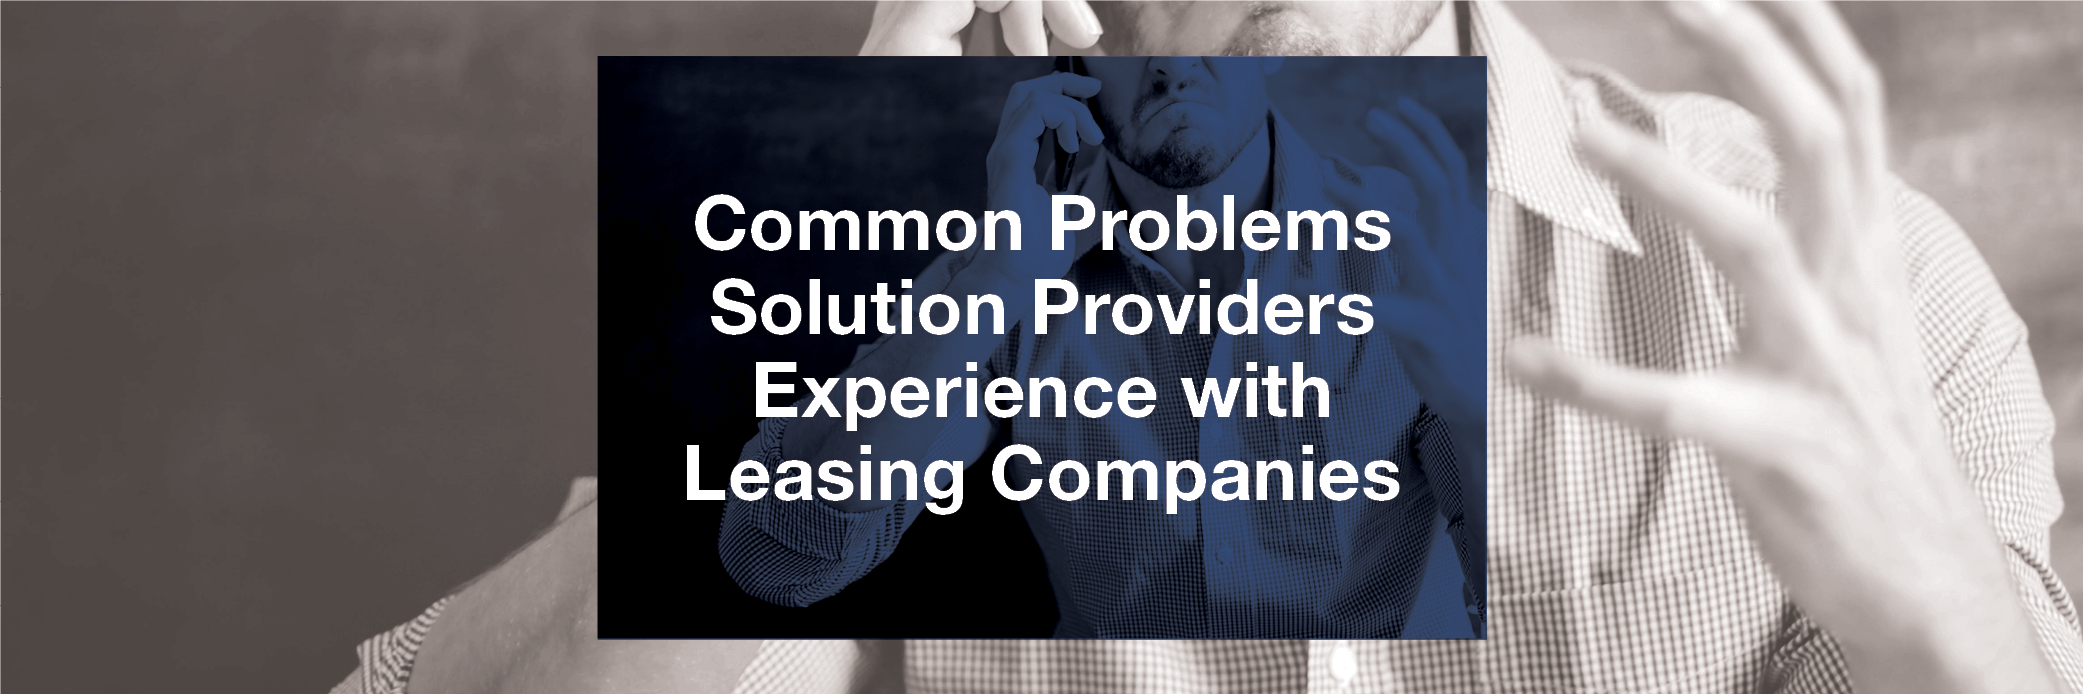 Common Problems Solution Providers Experience with Leasing Companies